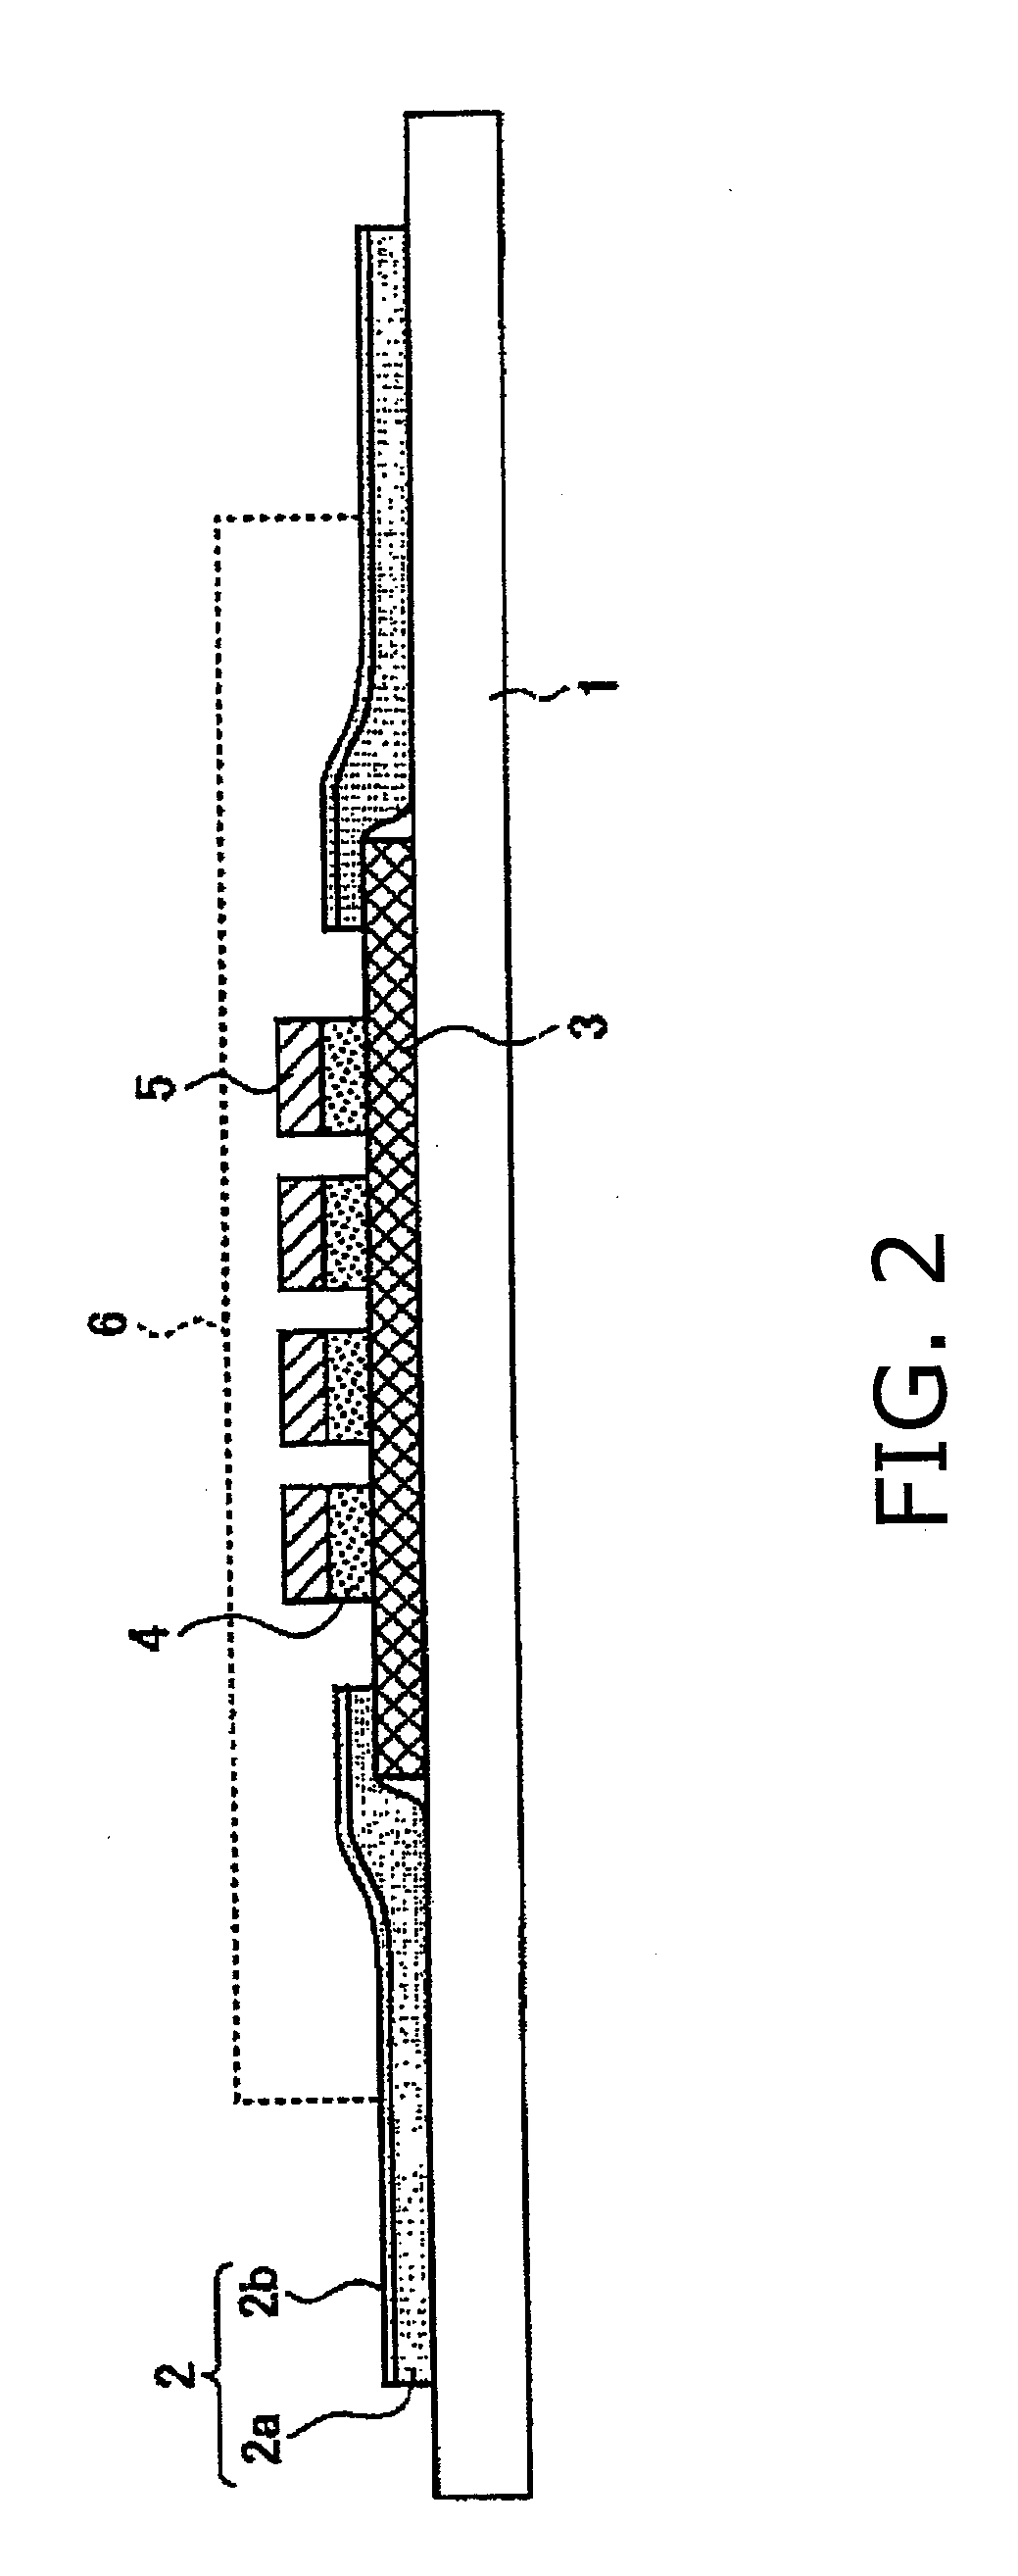 Laminate for forming a substrate with wires, substrate with wires and methods for producing them